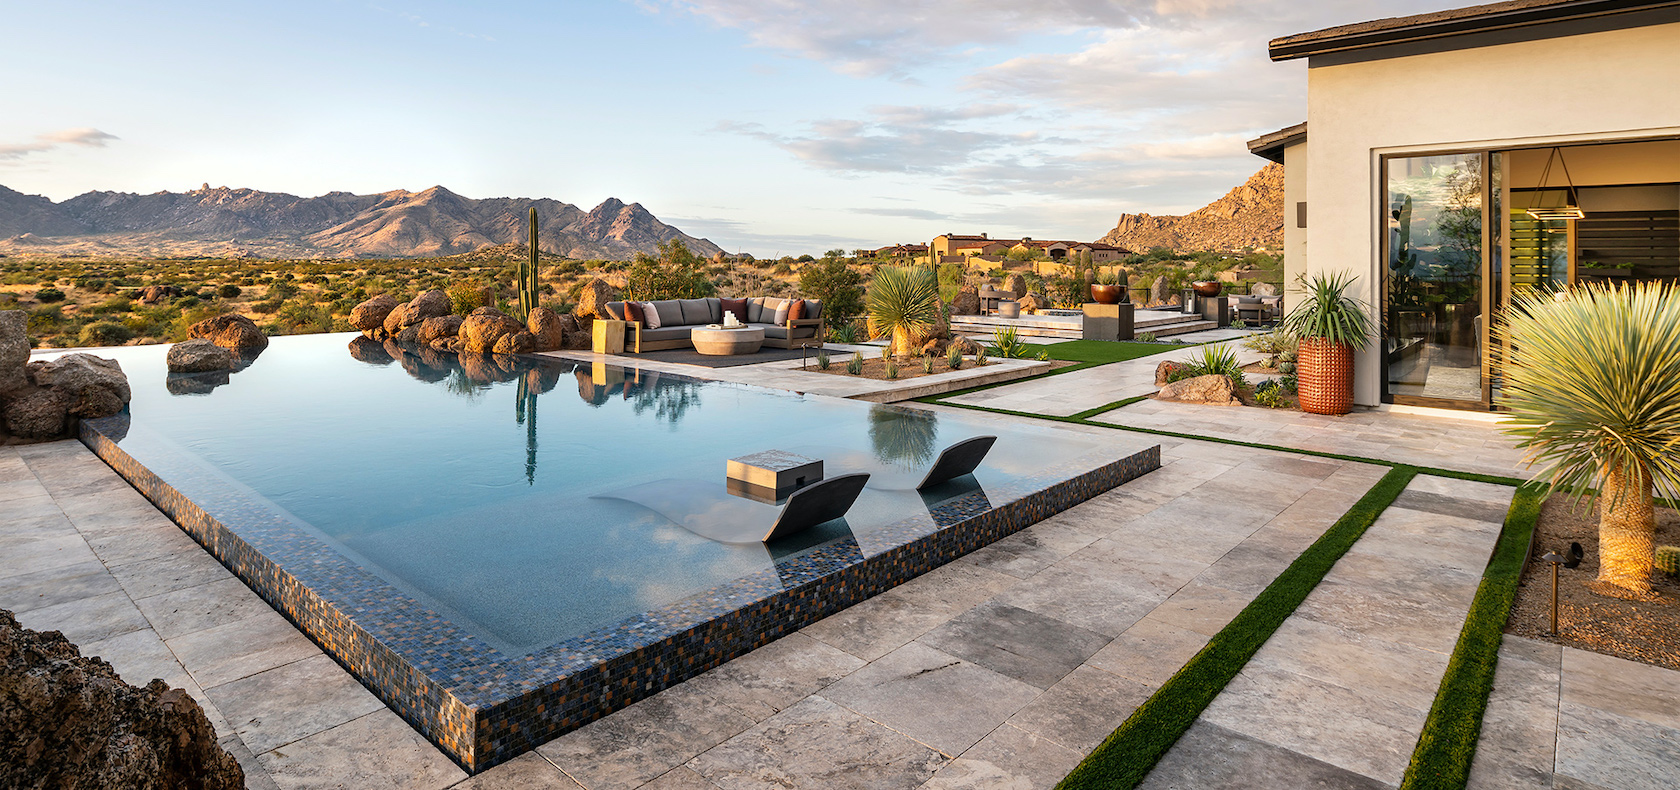 Luxury backyard in an Arizona home with a sitting area and a pool.